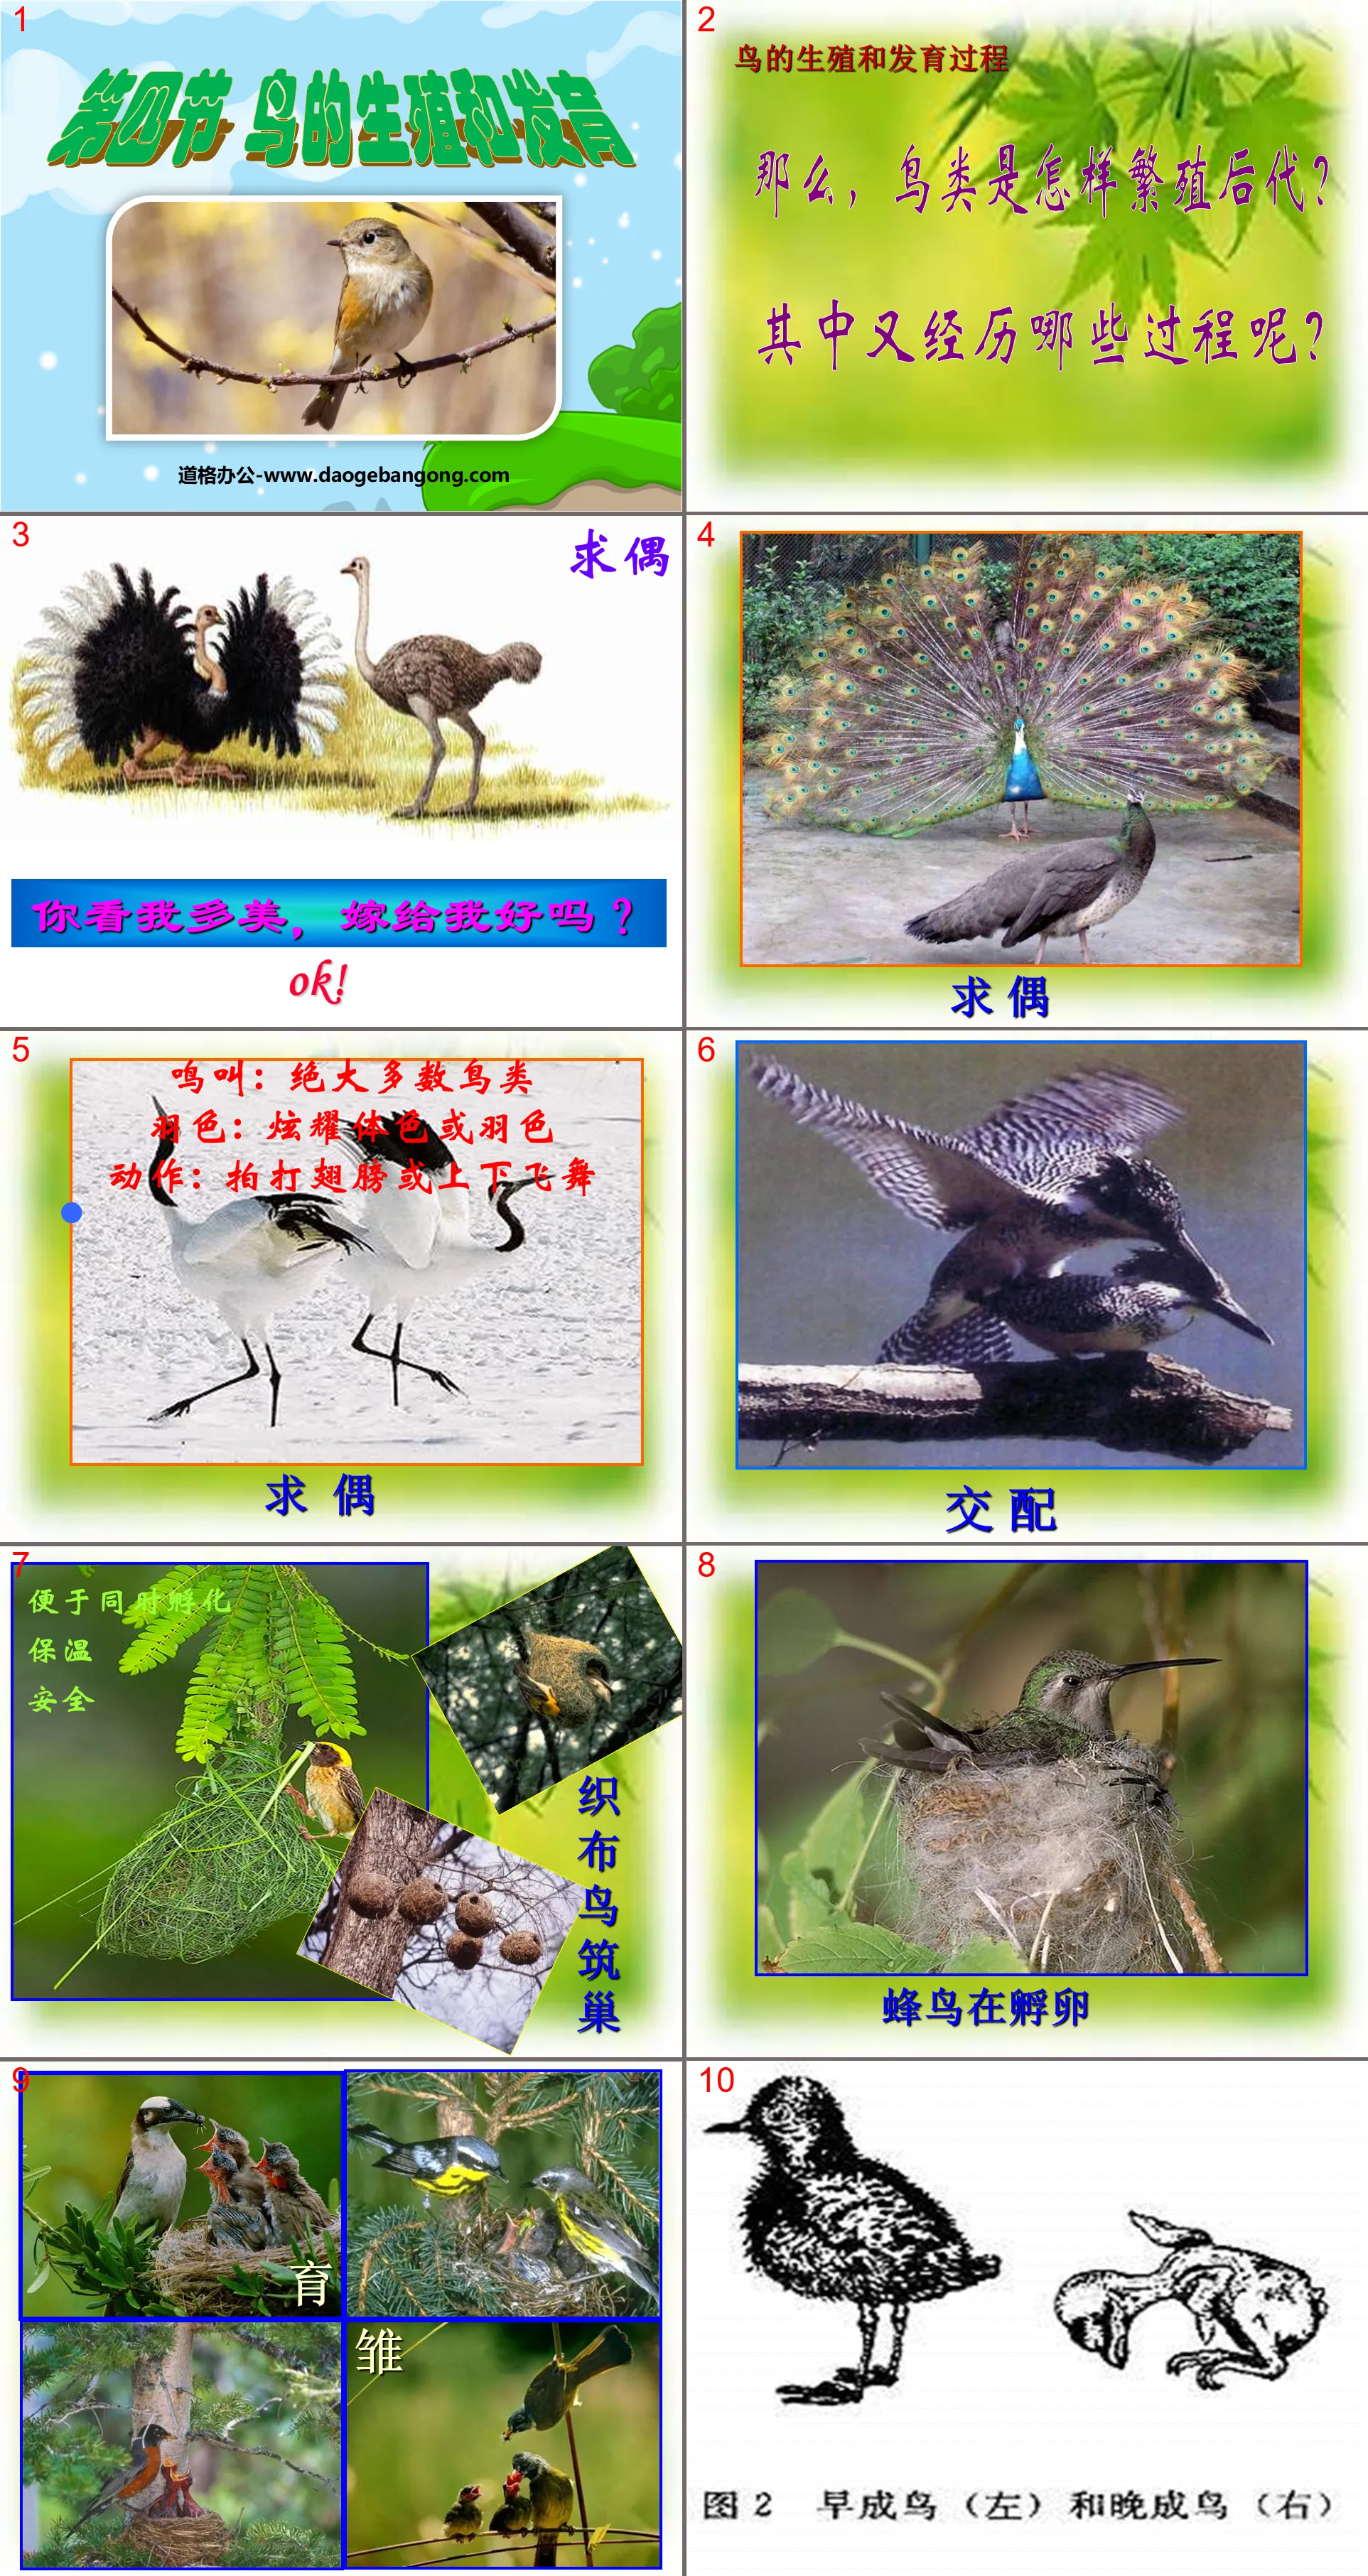 "Reproduction and Development of Birds" Biological Reproduction and Development PPT Courseware 3